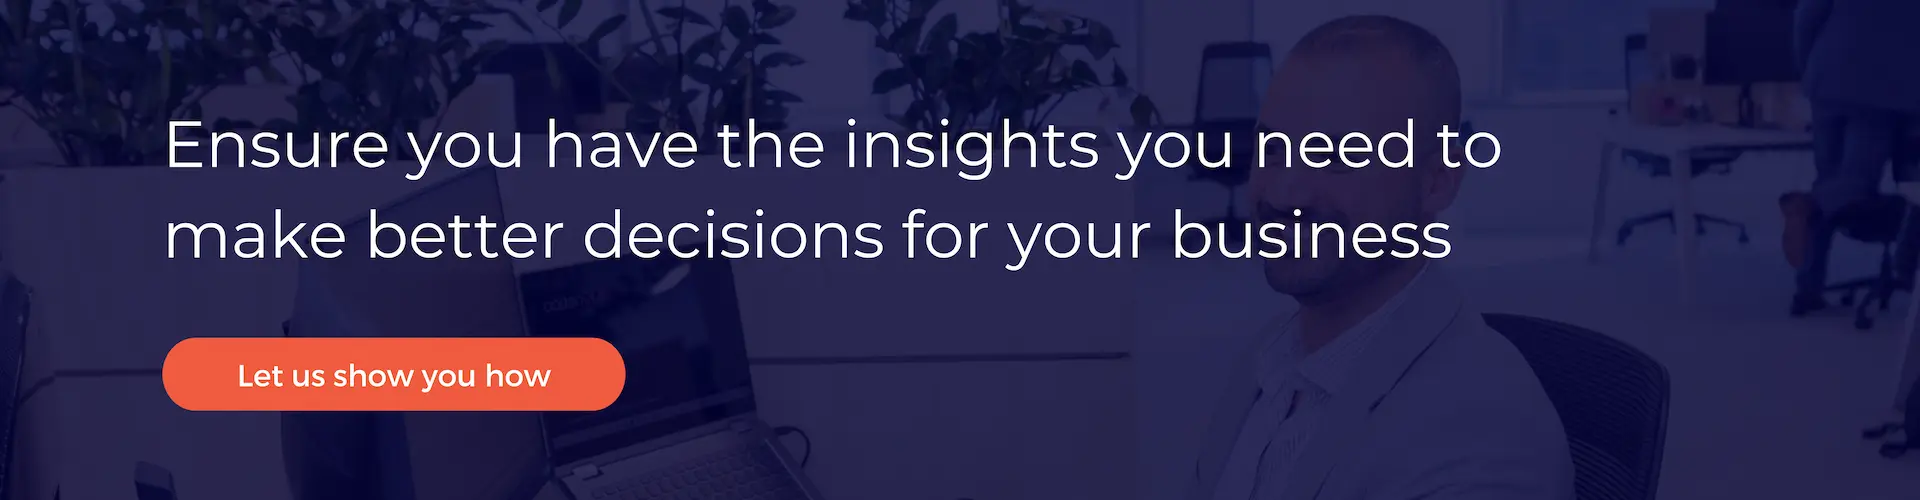 Ensure you have the insights you need to make better decisions for your business.